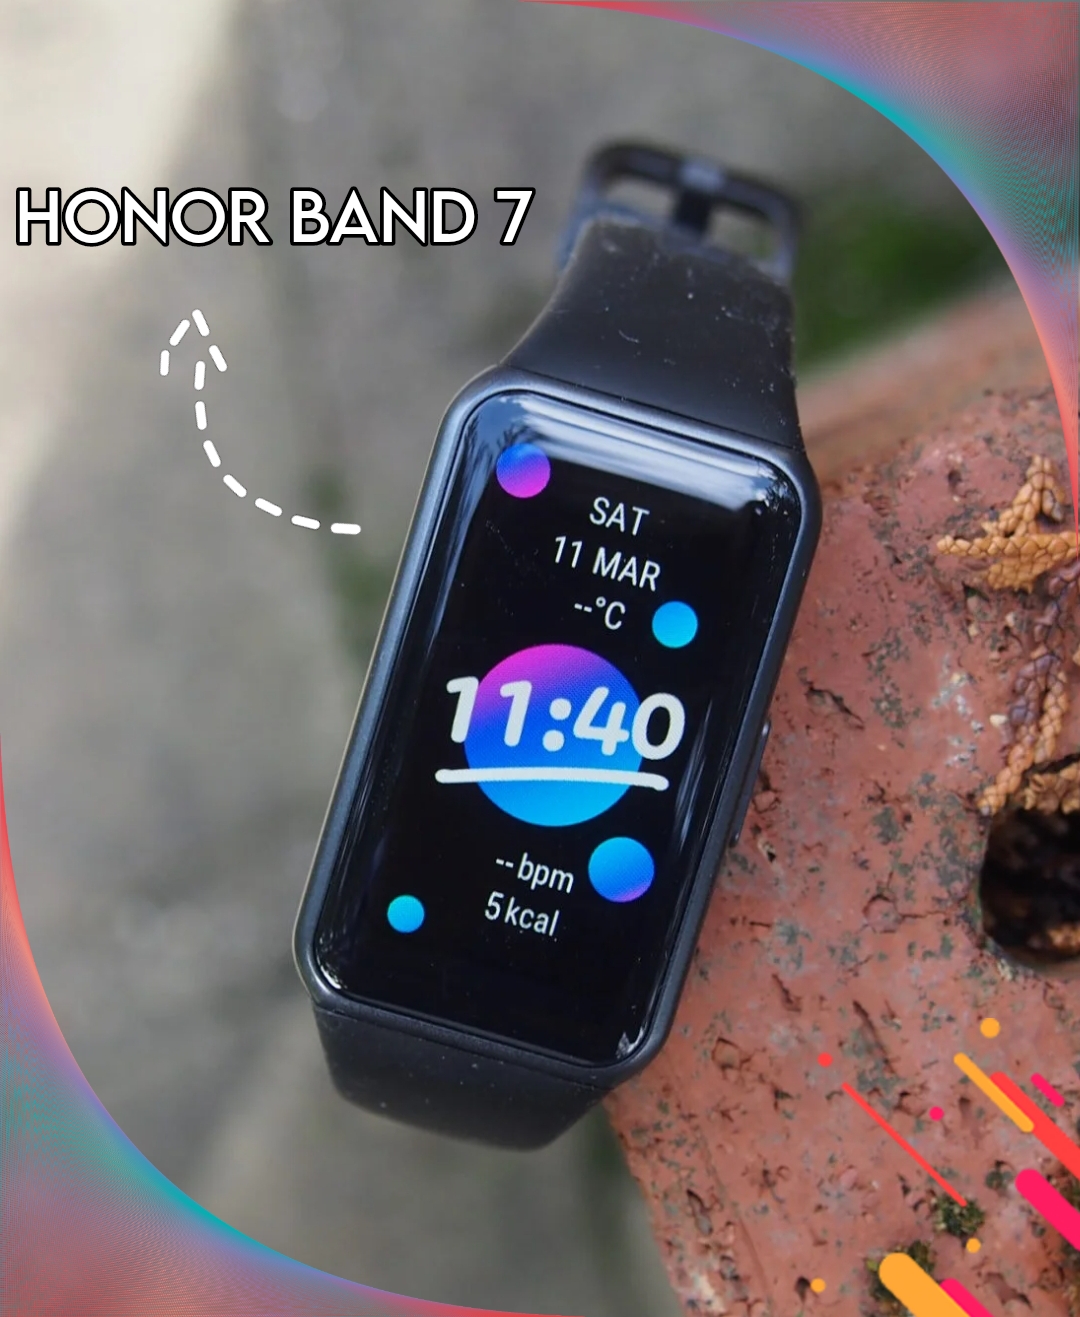 Honor Band 7 - All Features, Specifications & Price